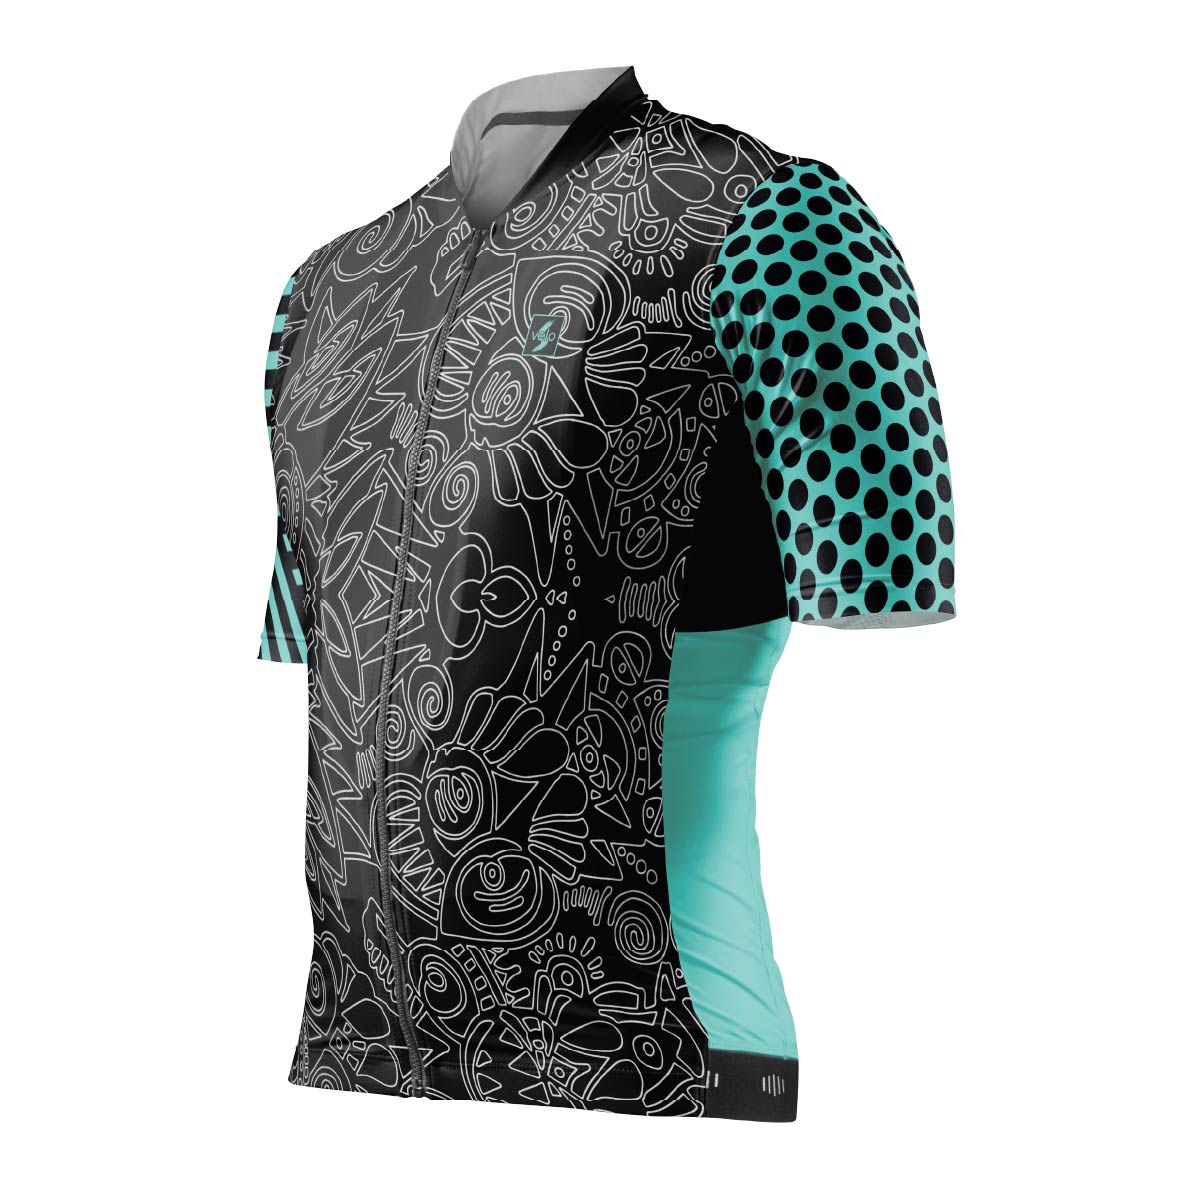 Men's cycling jersey Polka lines